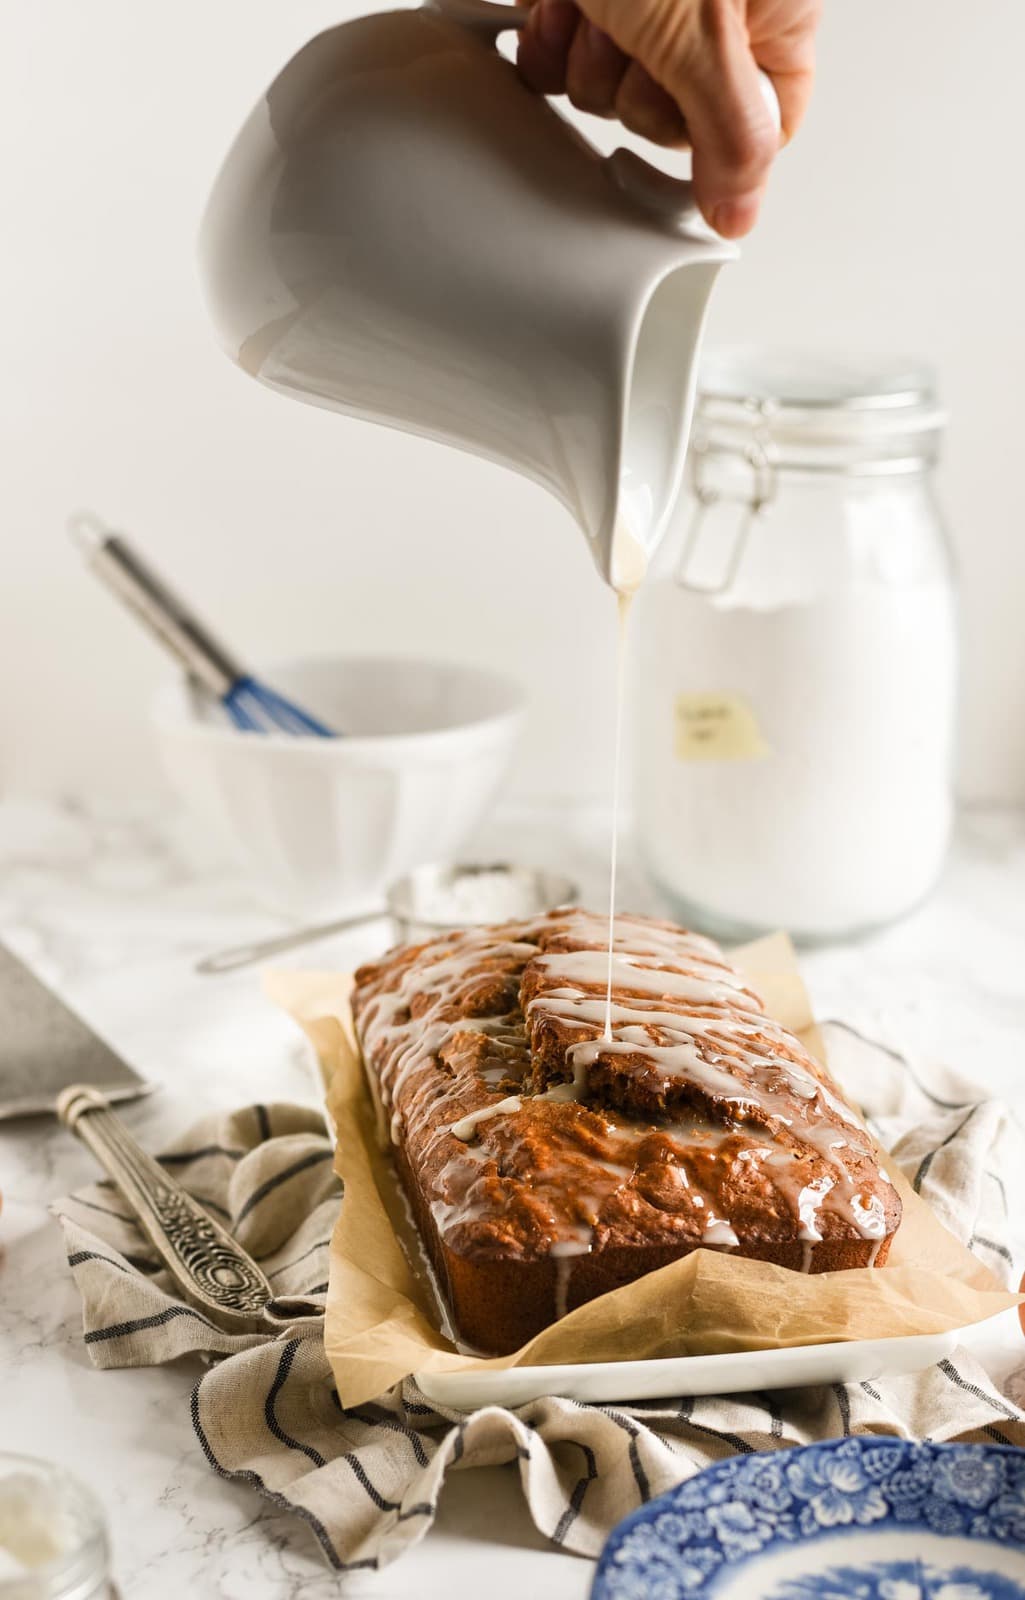 banana bread with glaze being drizzled on top